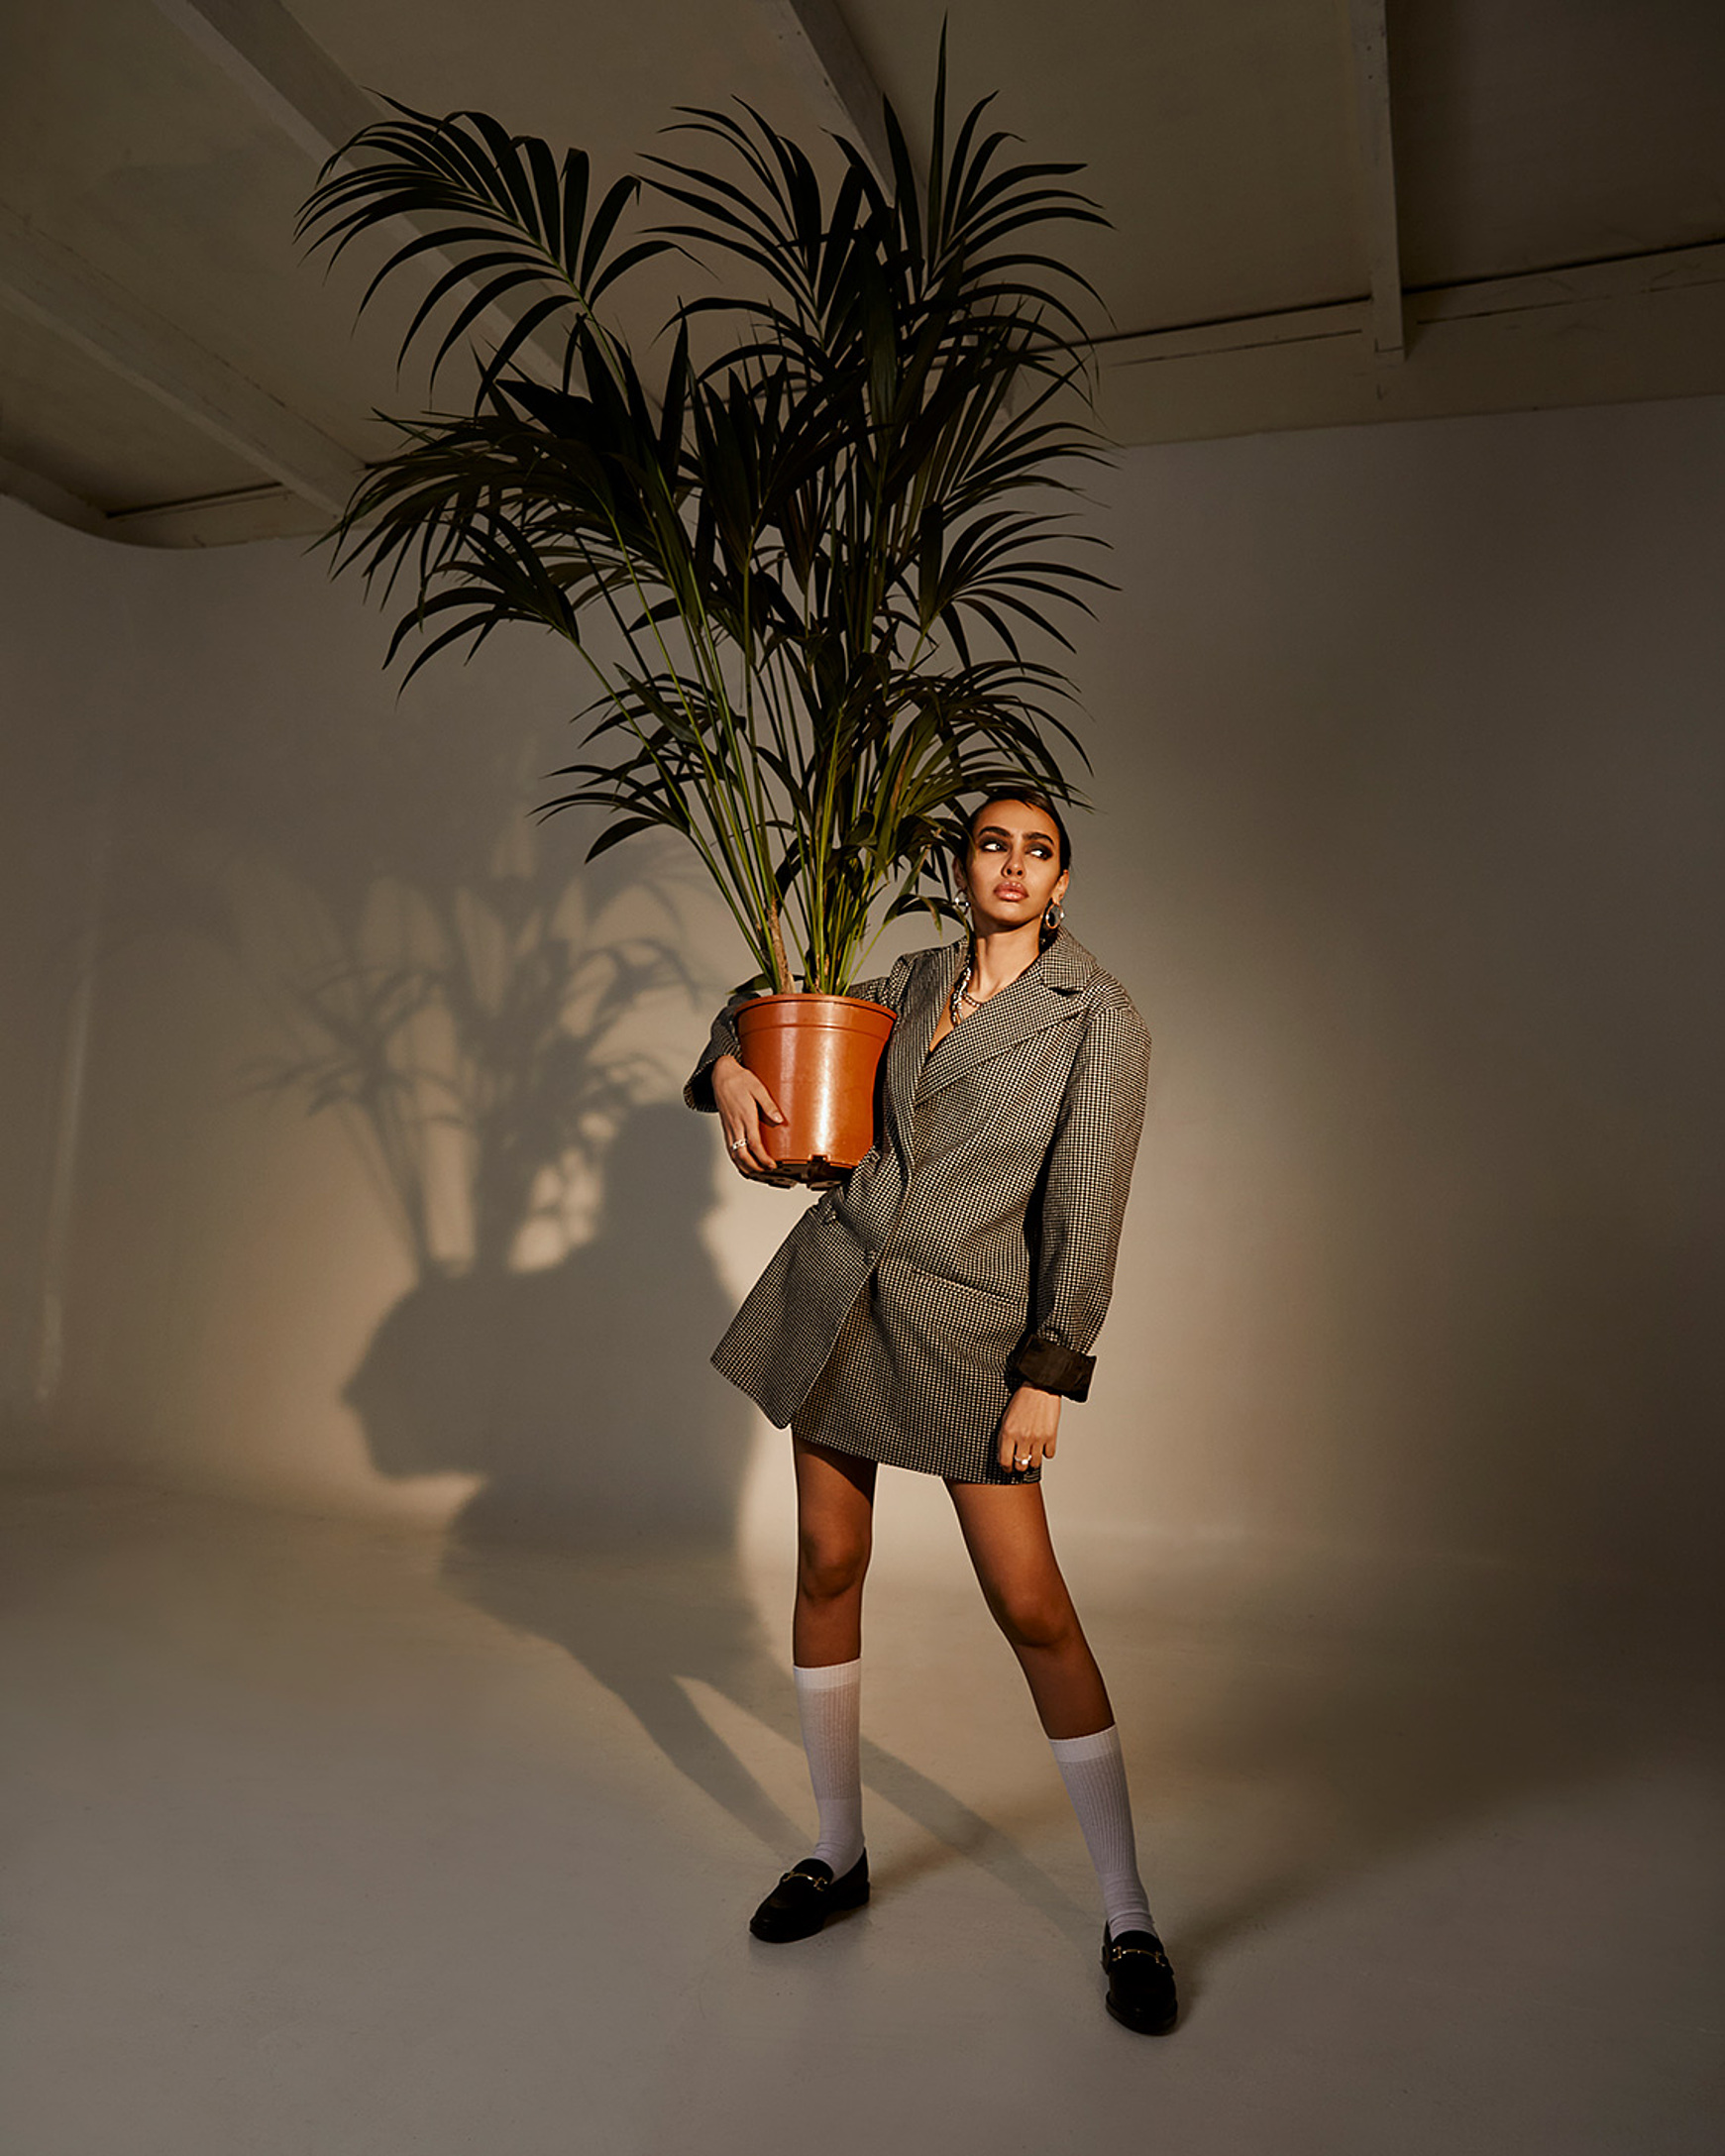 A model caring a big green plant in a blazer and white long socks